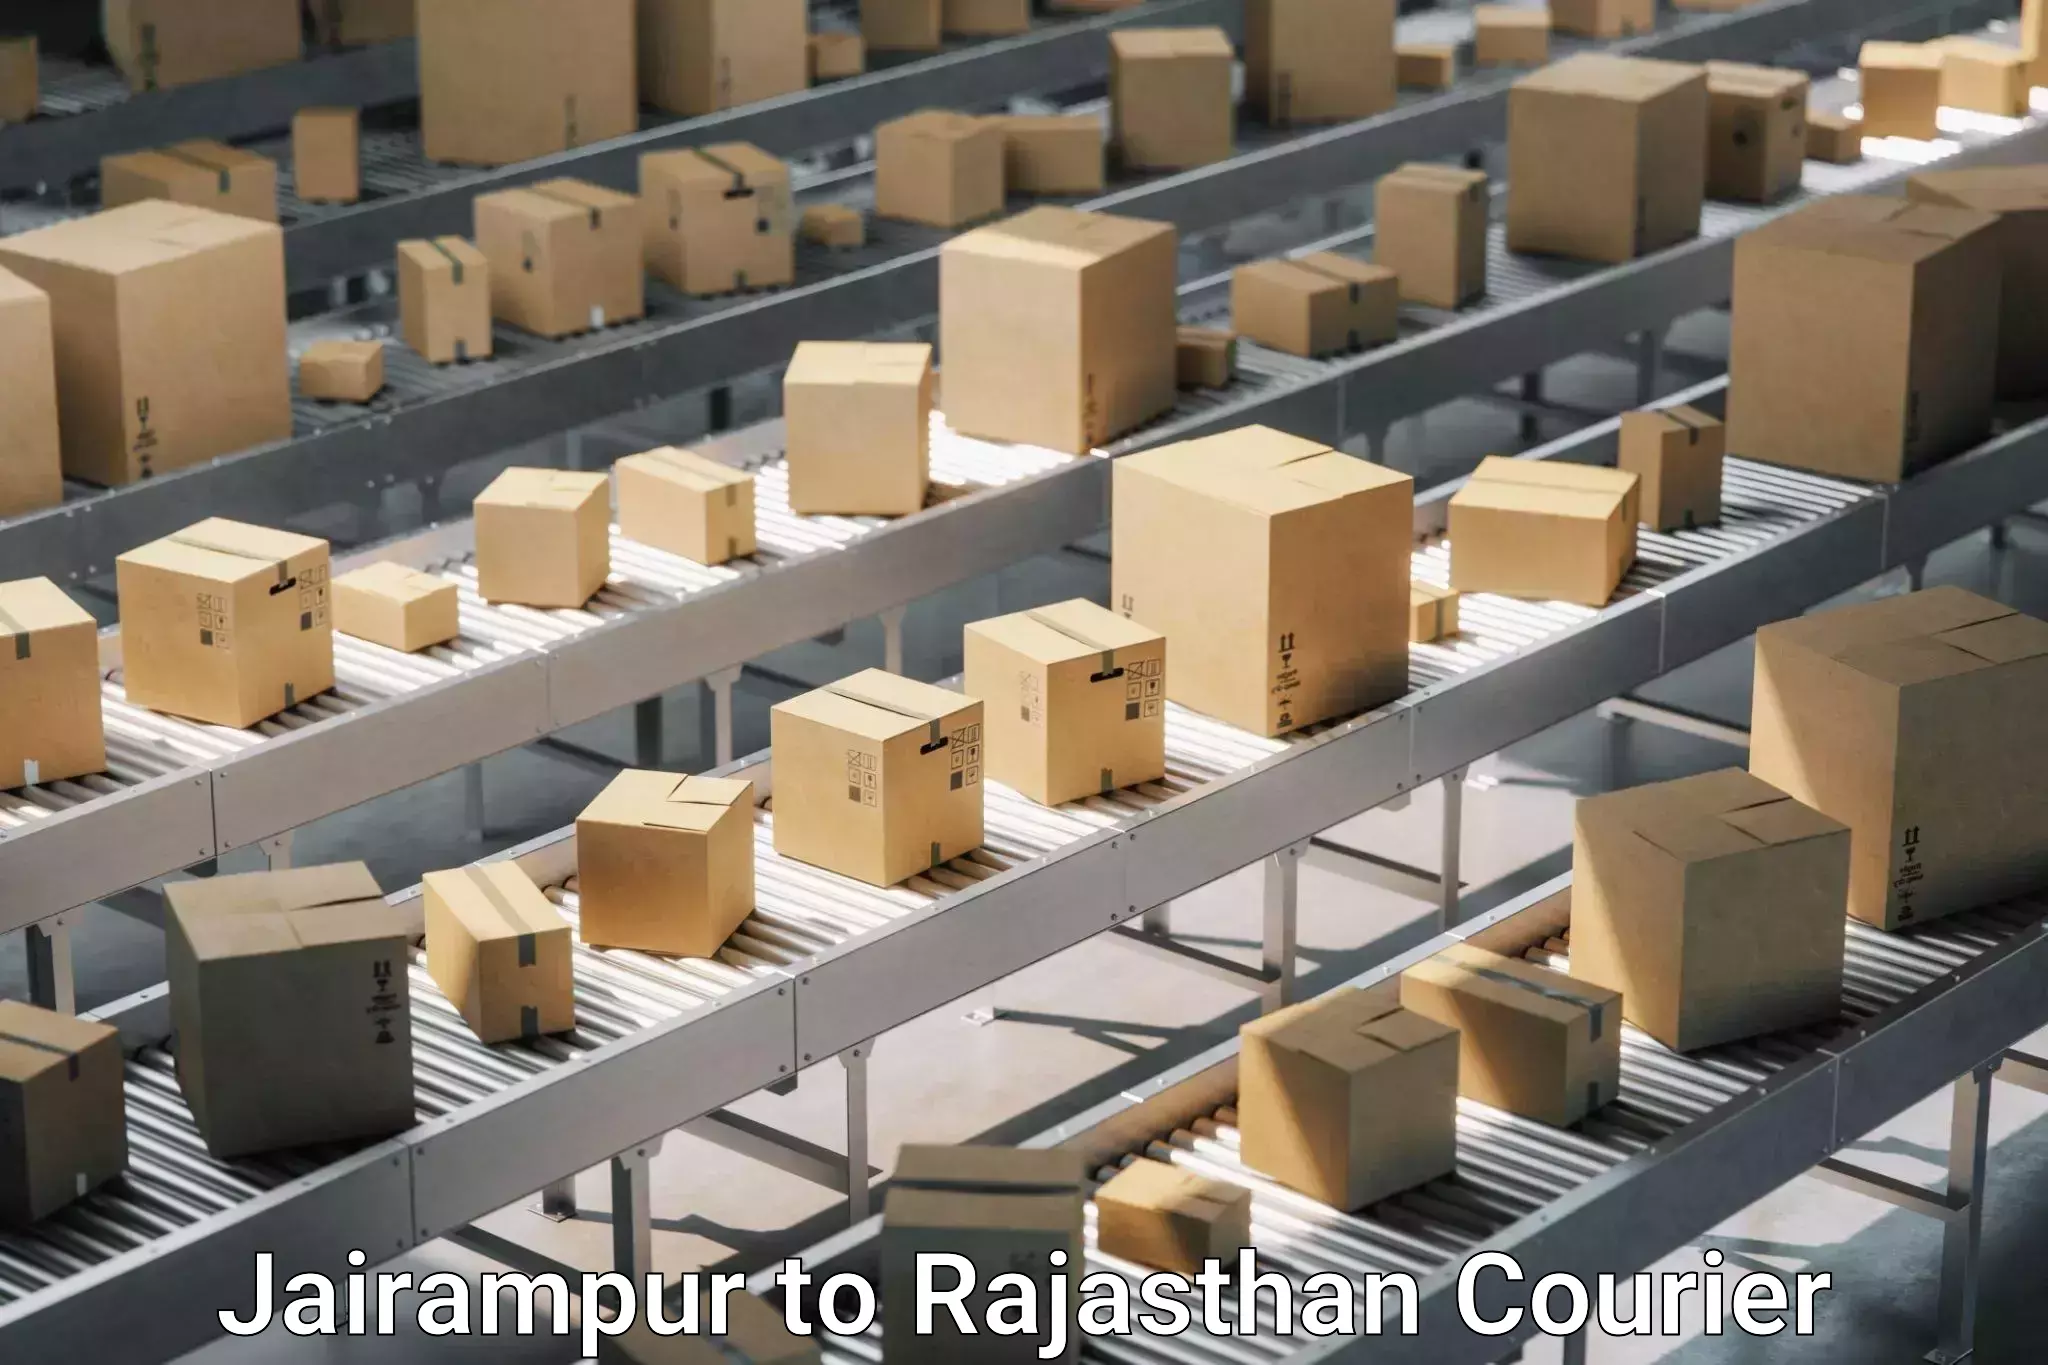 Quality relocation assistance Jairampur to Fatehpur Sikar